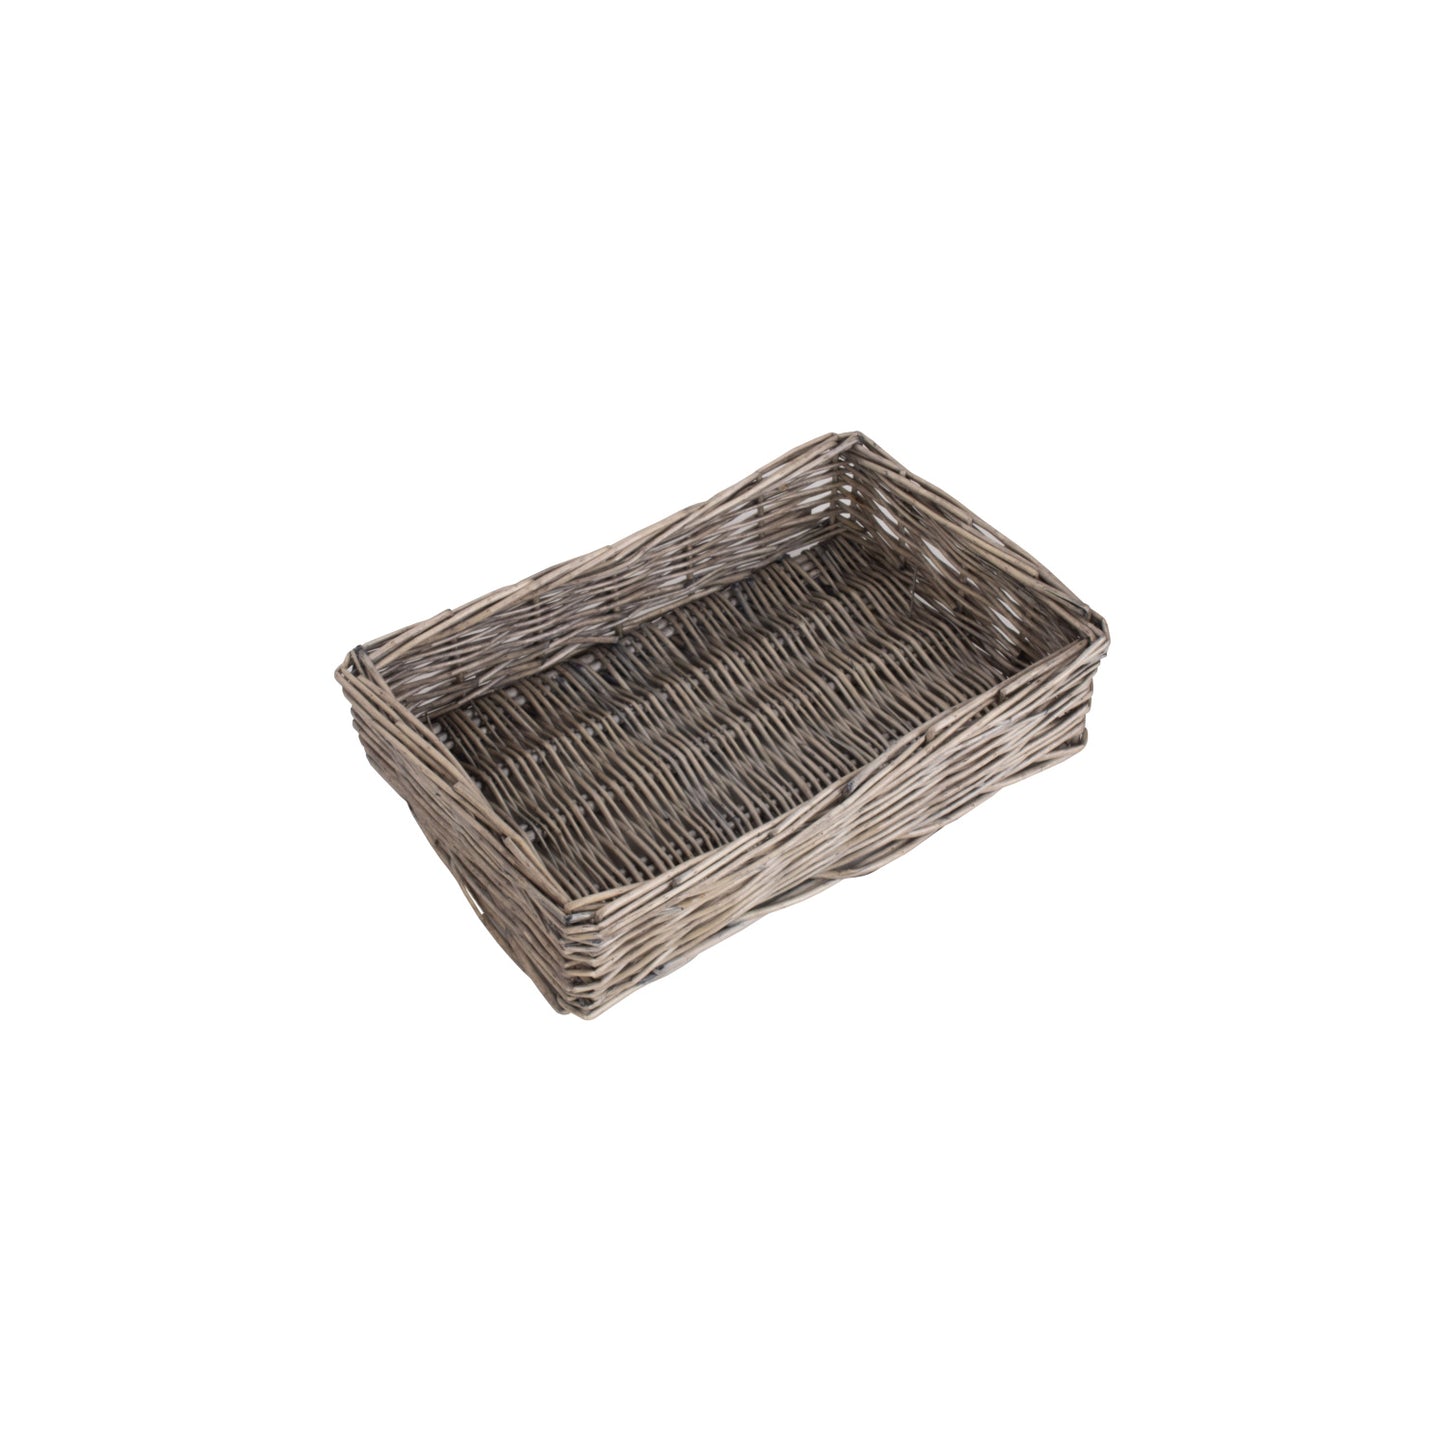 Small Antique Wash Straight-sided Tray